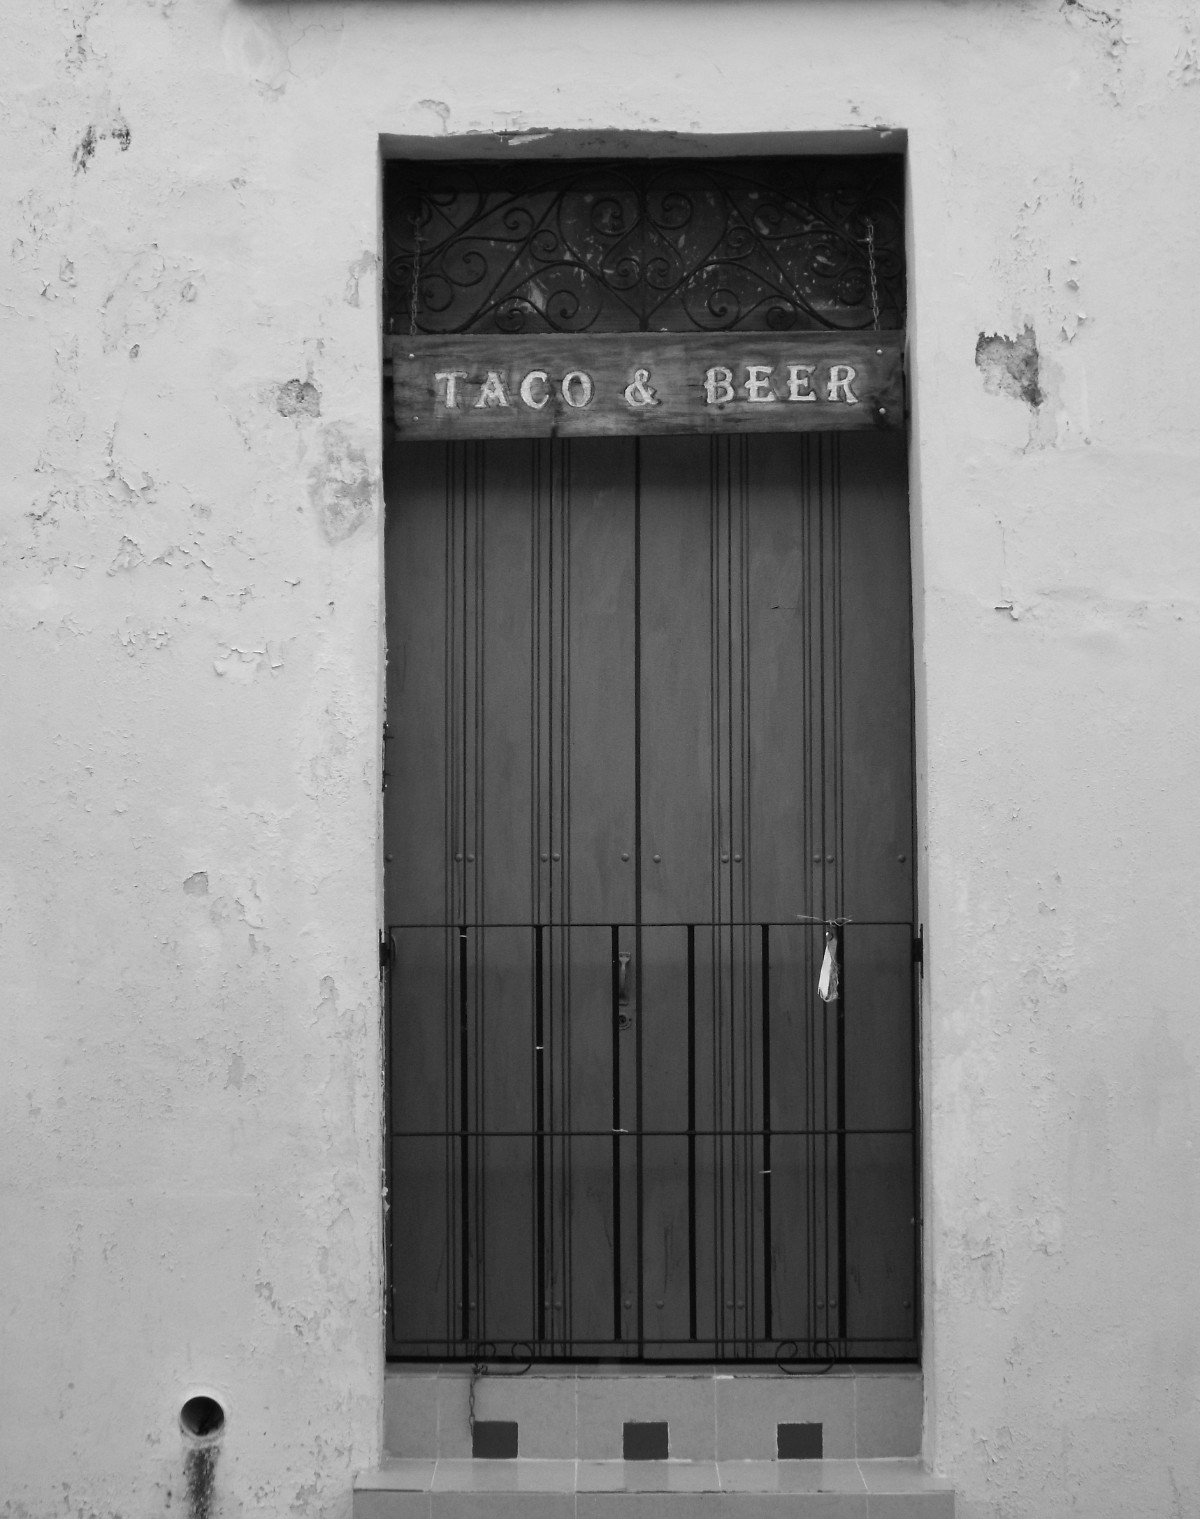 Taco and beer